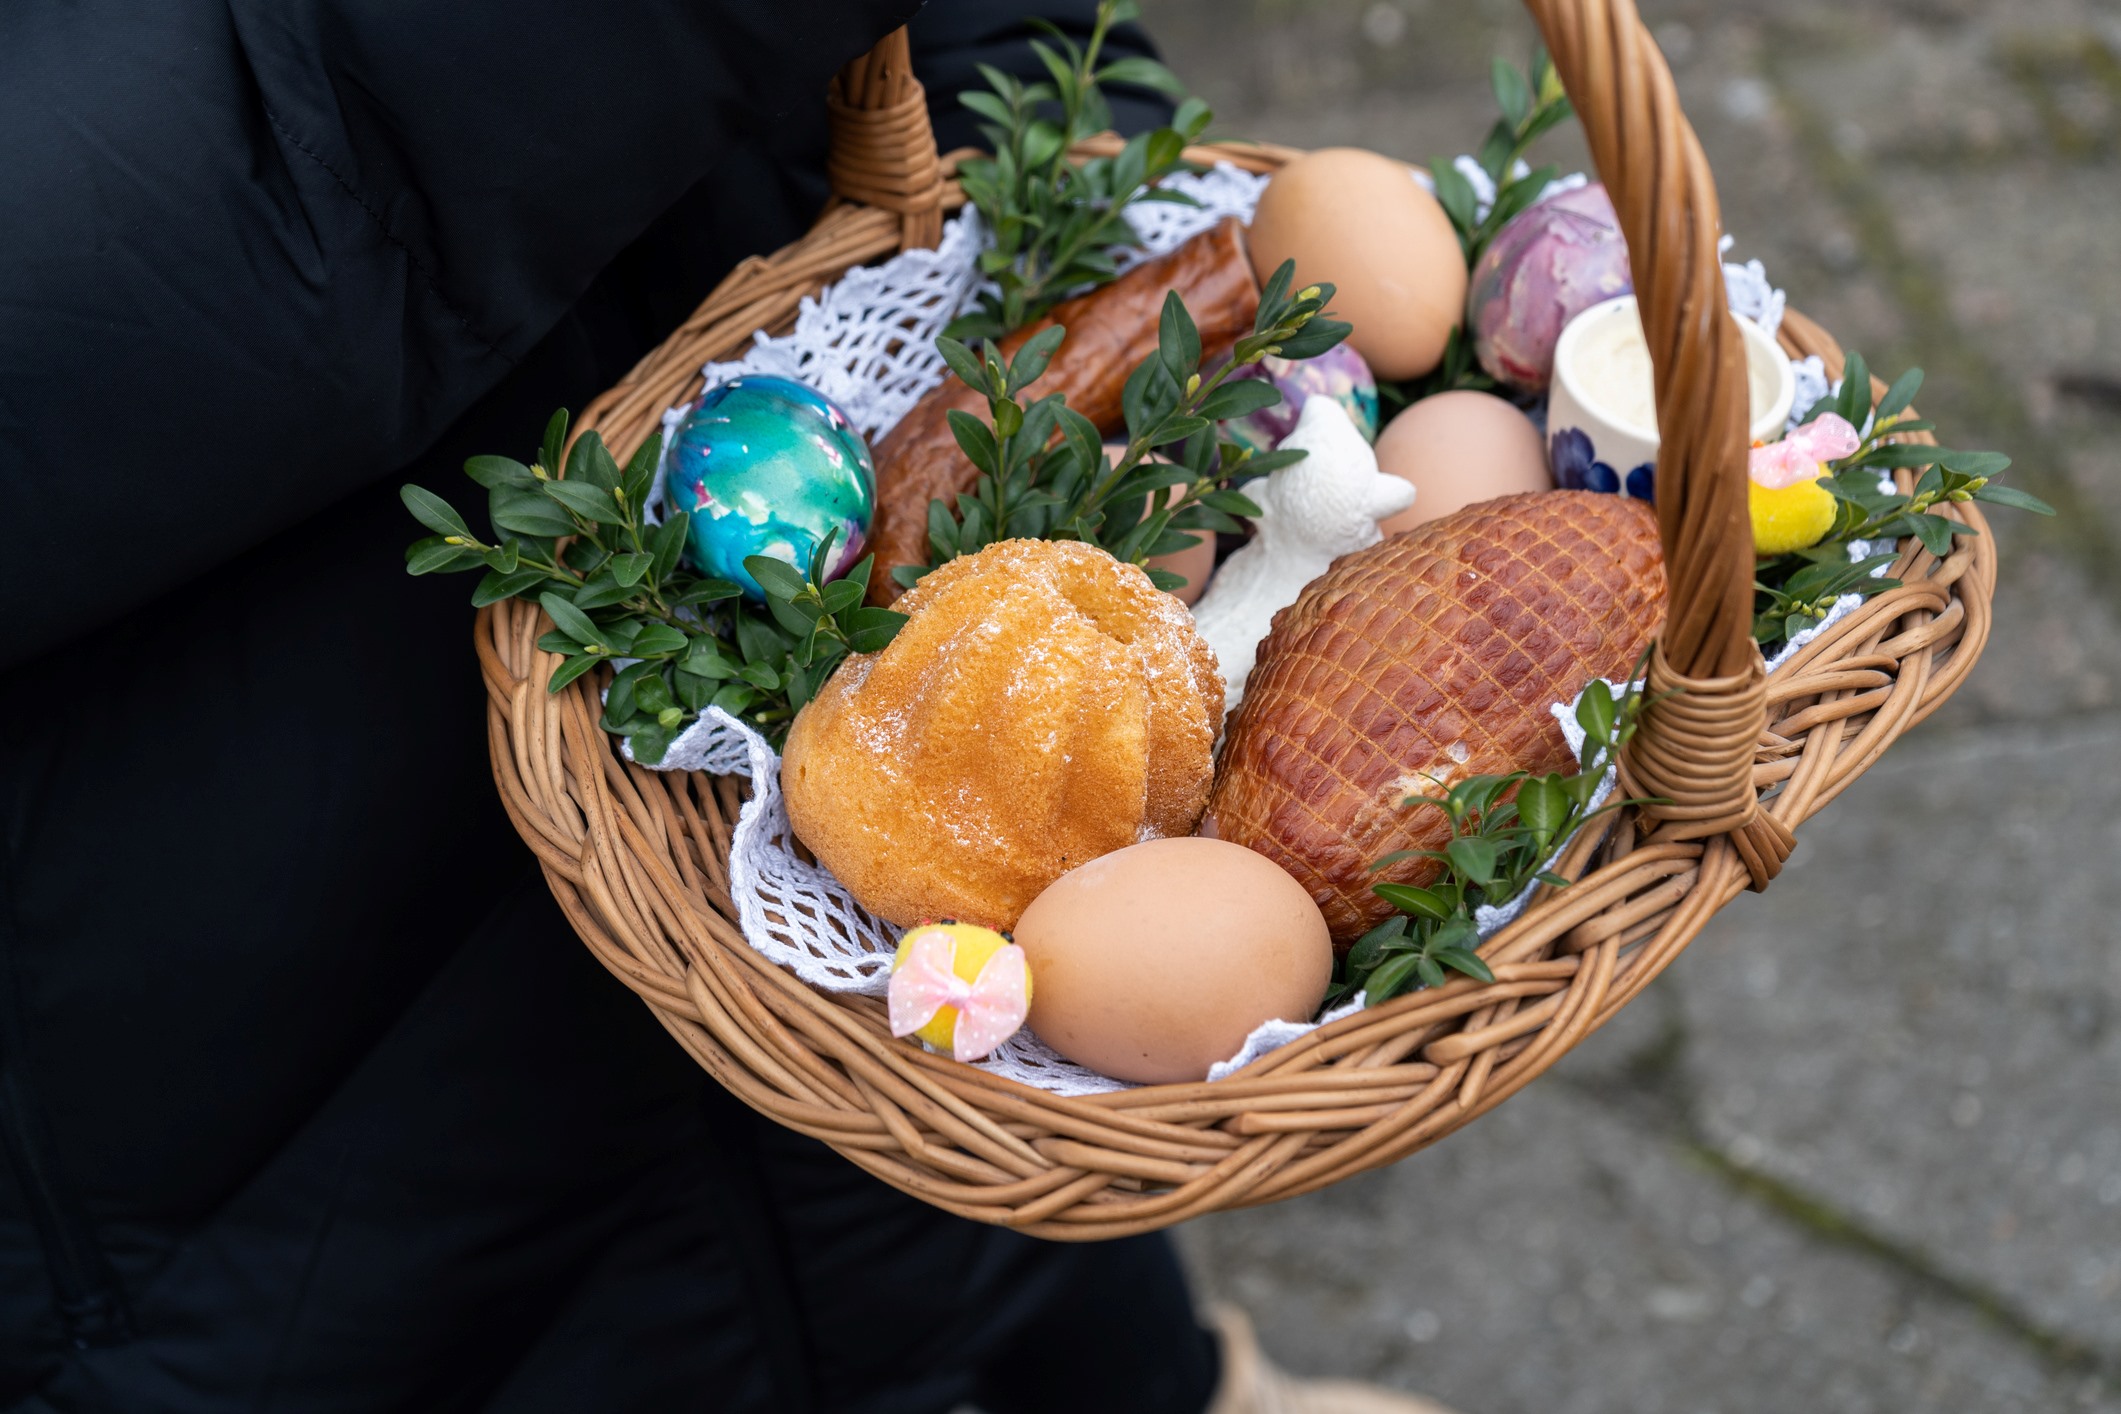 Typical Easter items in an Easter basket. The wicker basket being held by a person dressed in black includes a ham, a sausage, fresh brown eggs, a yellow bundt cake, fragile, decorated glass or plastic easter eggs, a ceramic coffee mug, and decorative green sprigs of fresh herbs.